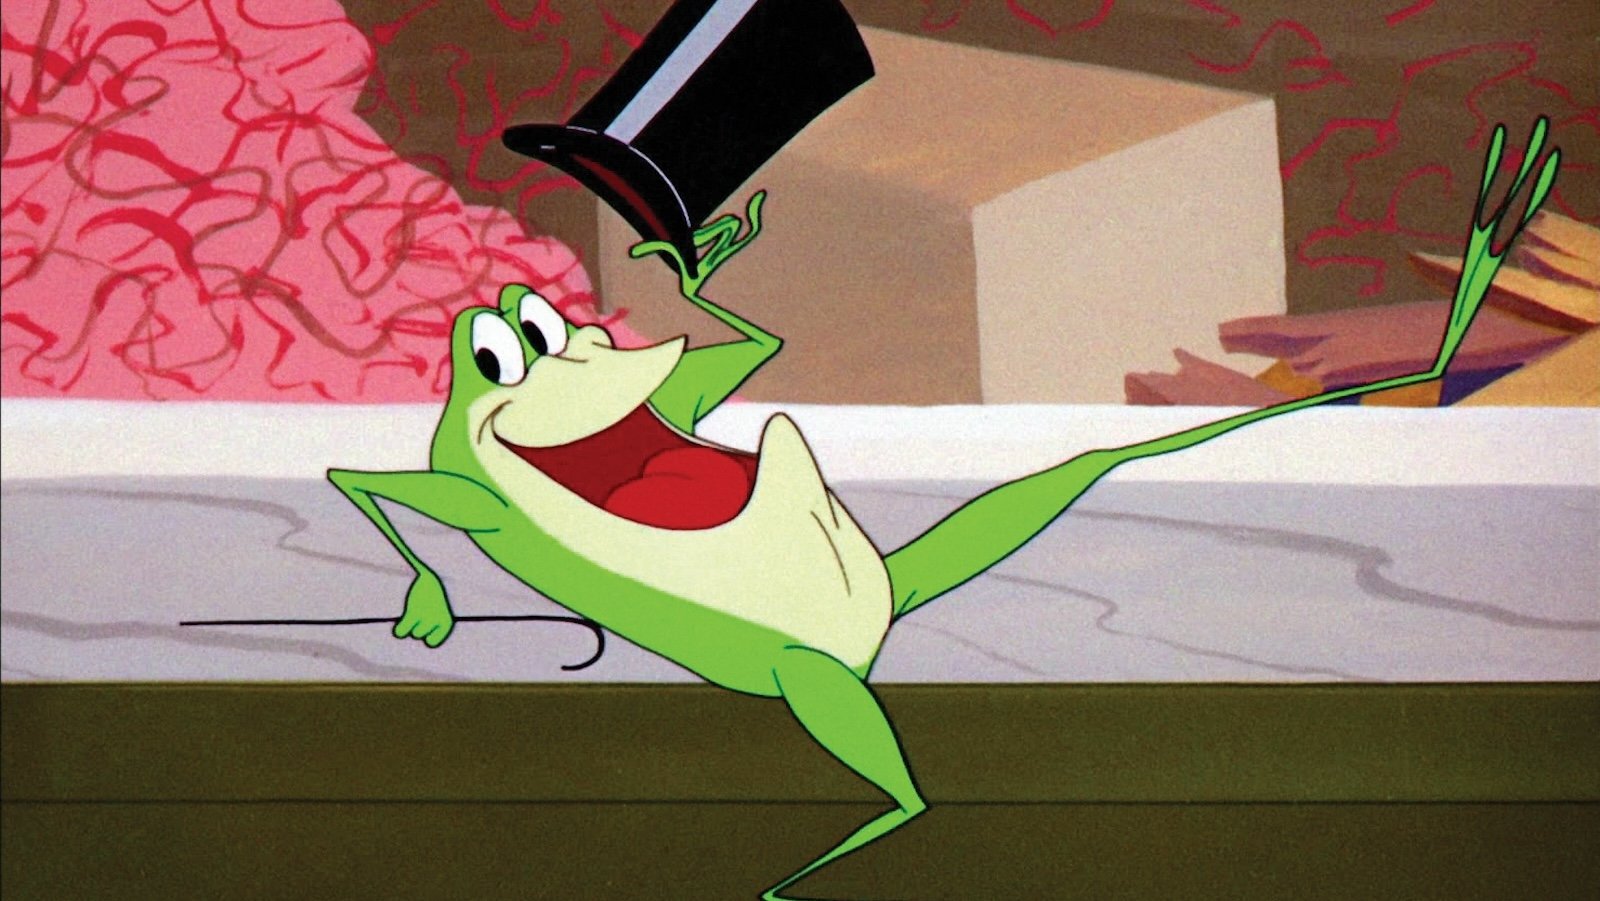 A cartoon frog dancing with a cane and top hat, mouth open smiling at camera.